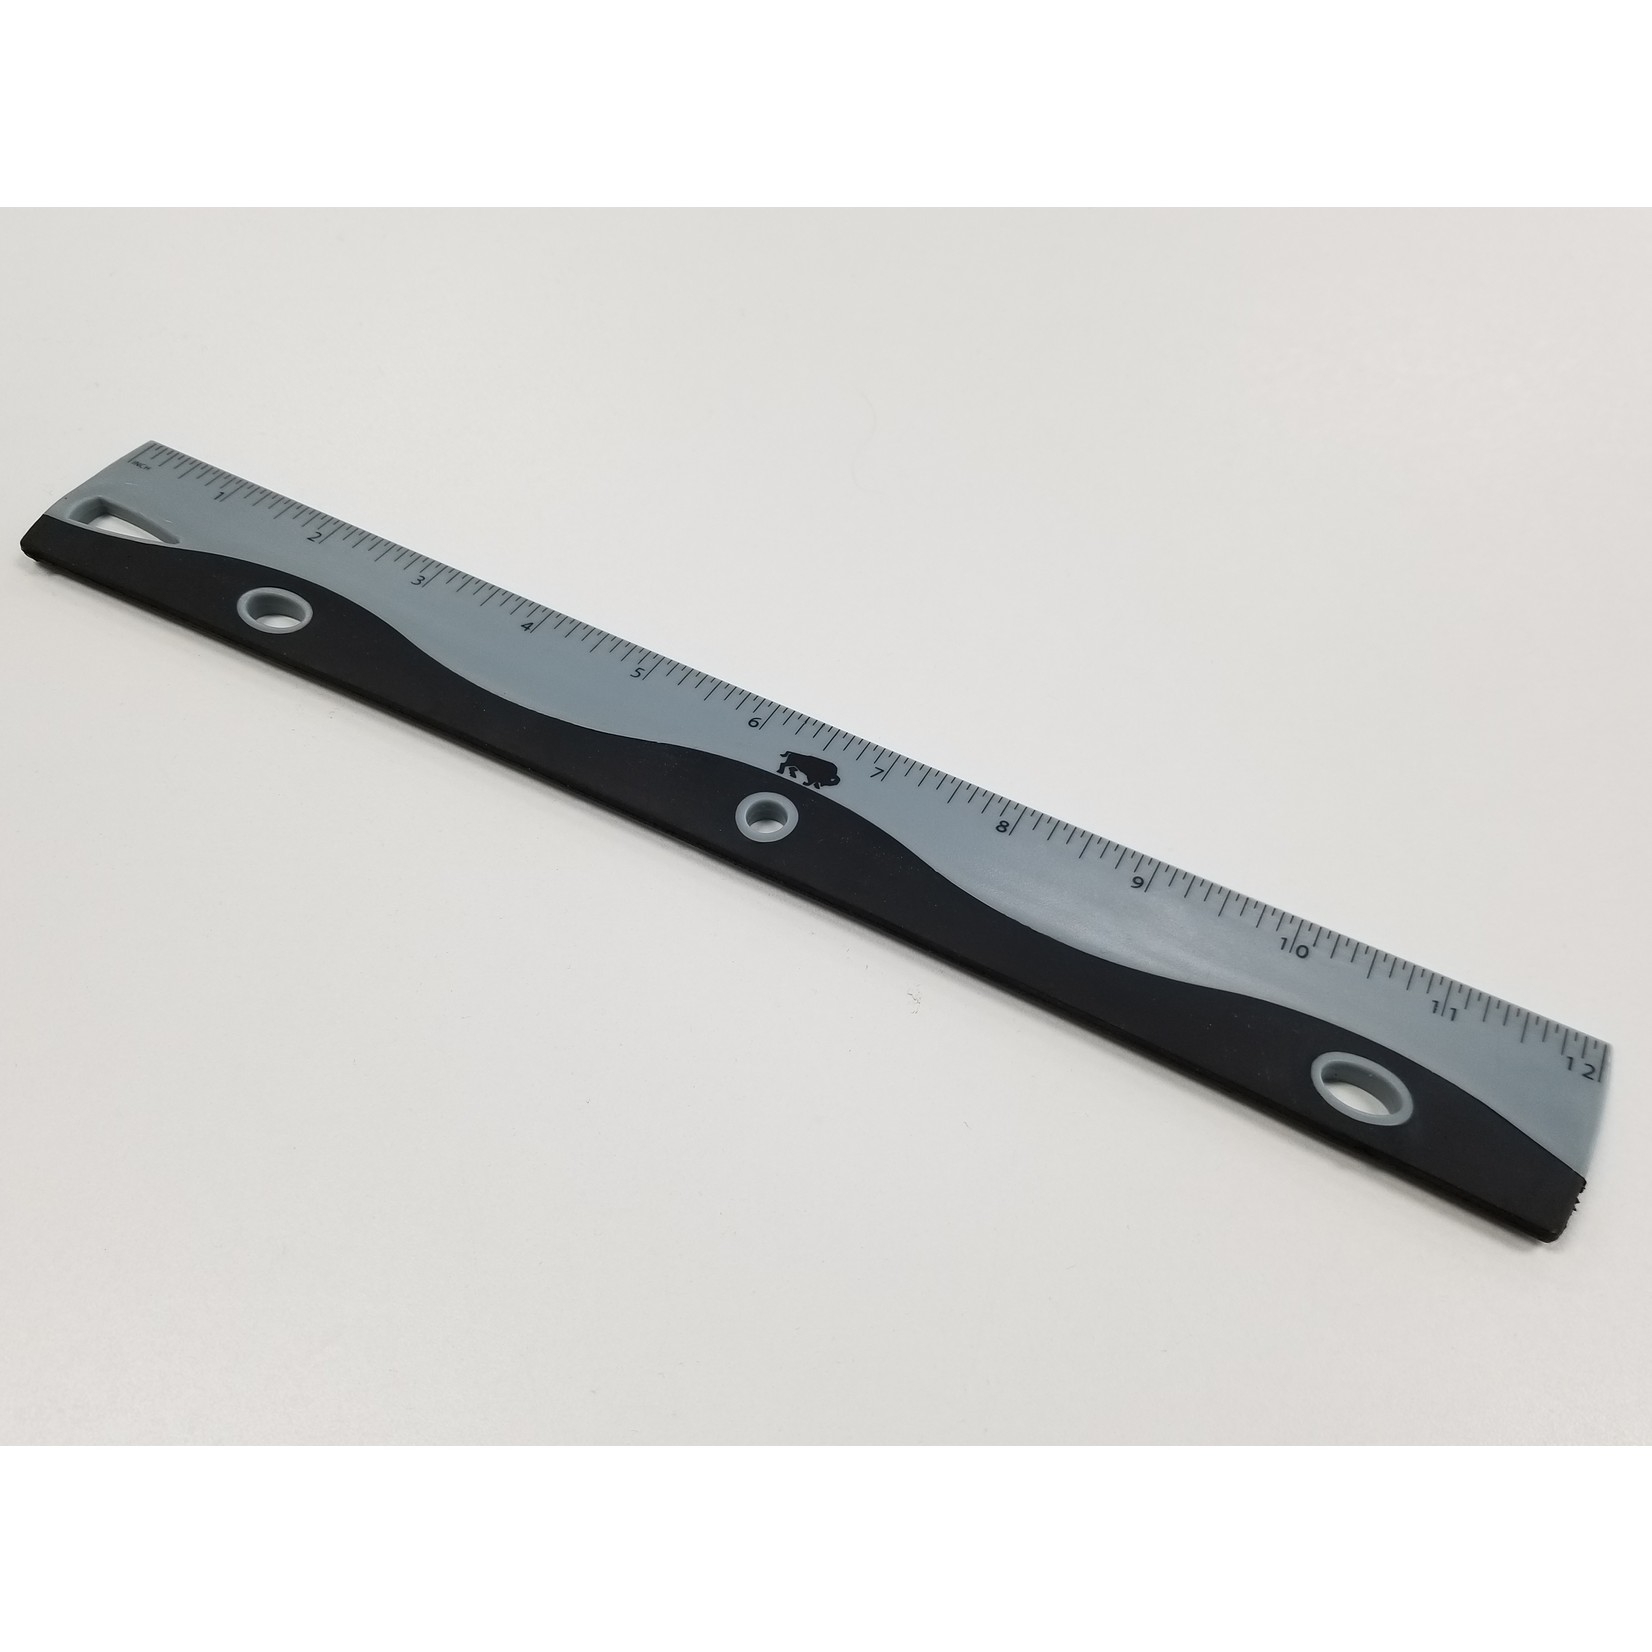 Ruler with binder holes